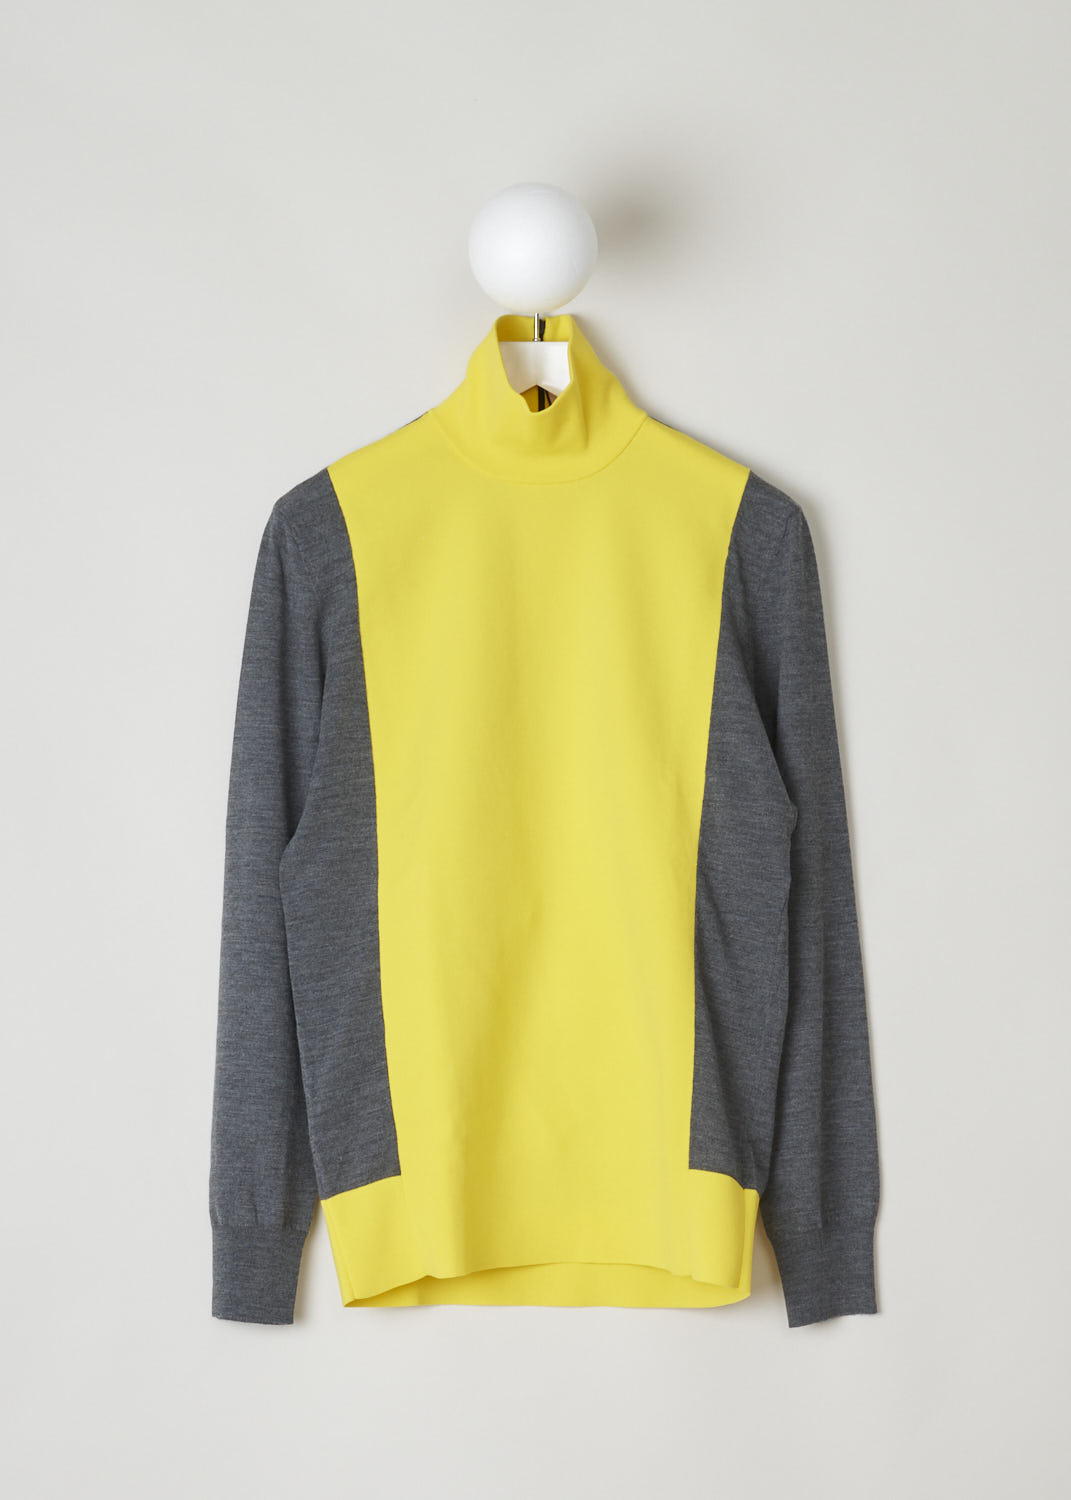 PLAN C, TWO-TONE TURTLENECK SWEATER, DVCMC51KG0_FW003_Z3050, Yellow, Grey, Front, Beautiful two-toned turtleneck. The long sleeves and back are grey and the front and neck are bright yellow. In the back of the neck, a concealed zipper can be found.